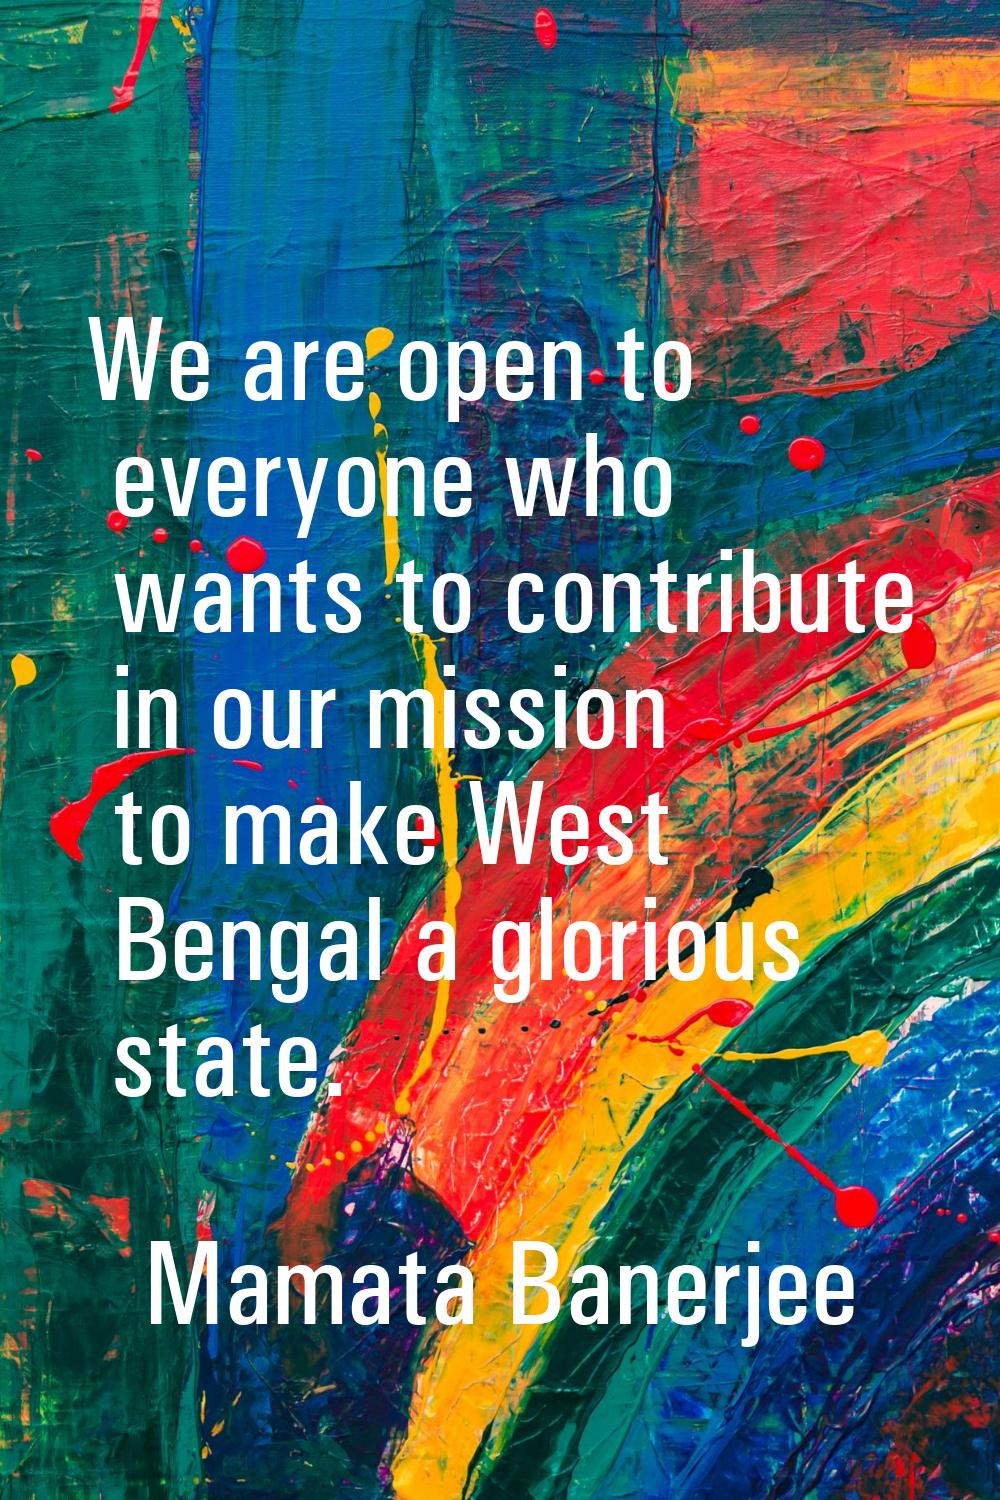 We are open to everyone who wants to contribute in our mission to make West Bengal a glorious state